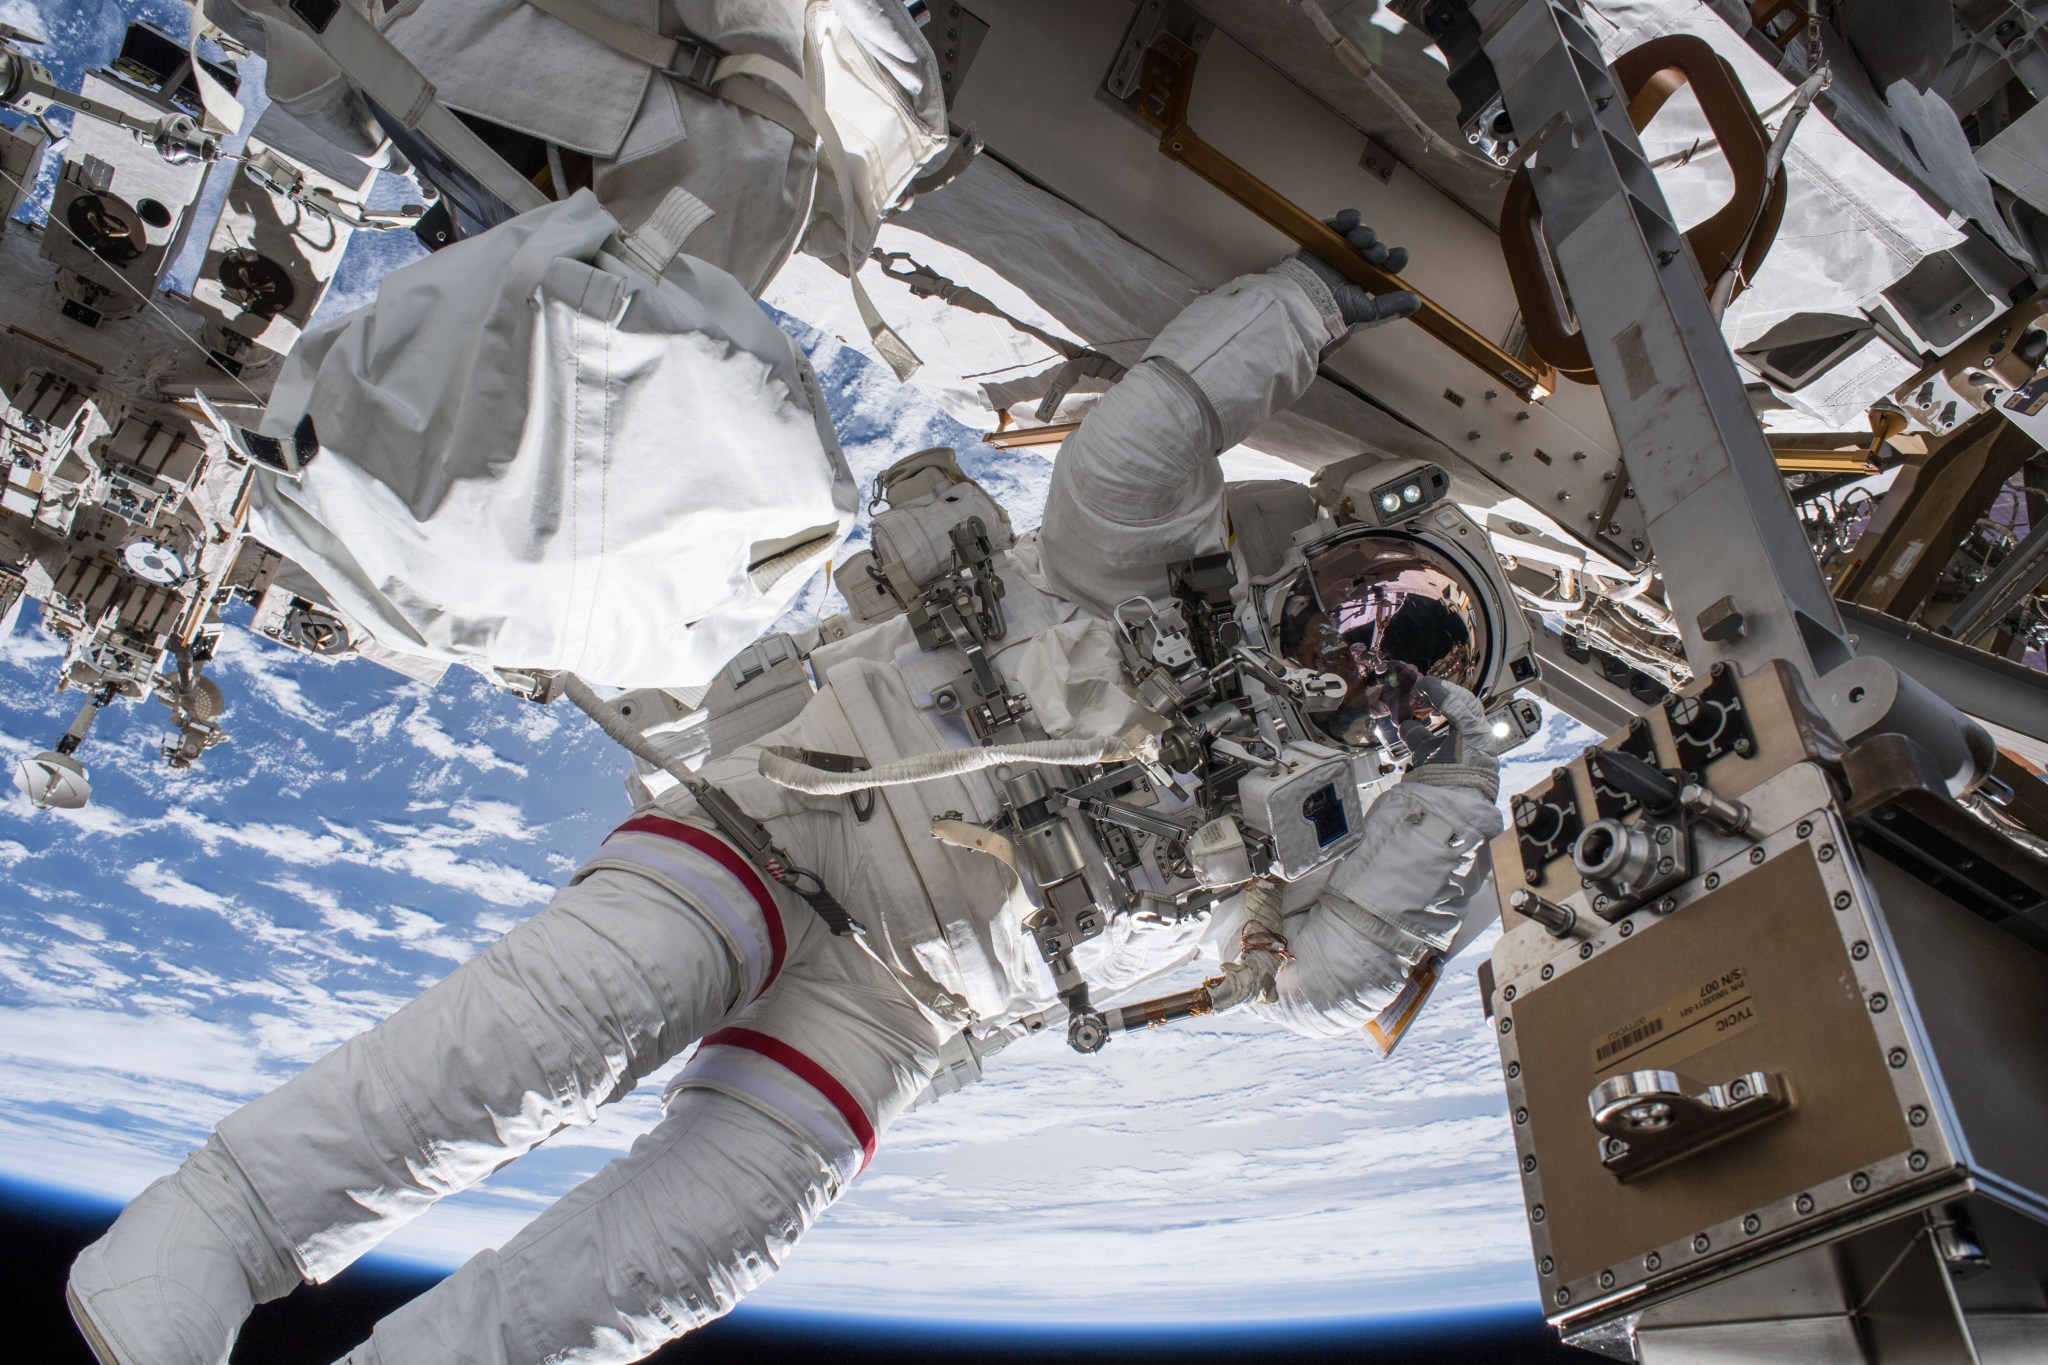 NASA astronaut Drew Feustel seemingly hangs off the International Space Station while conducting a spacewalk.